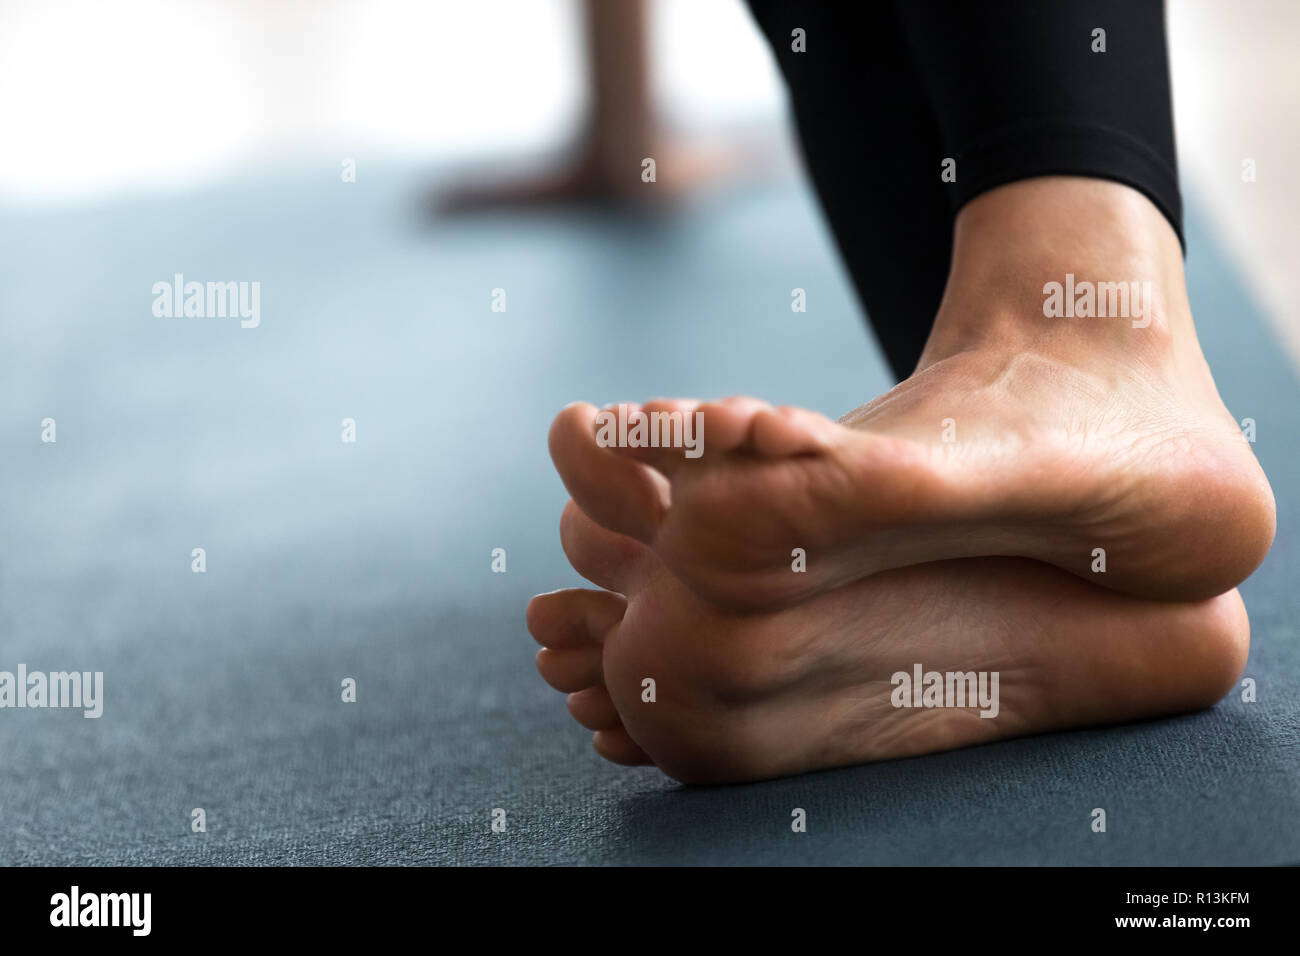 Women's bare feet connection on yoga cushions - Stock Image - F017